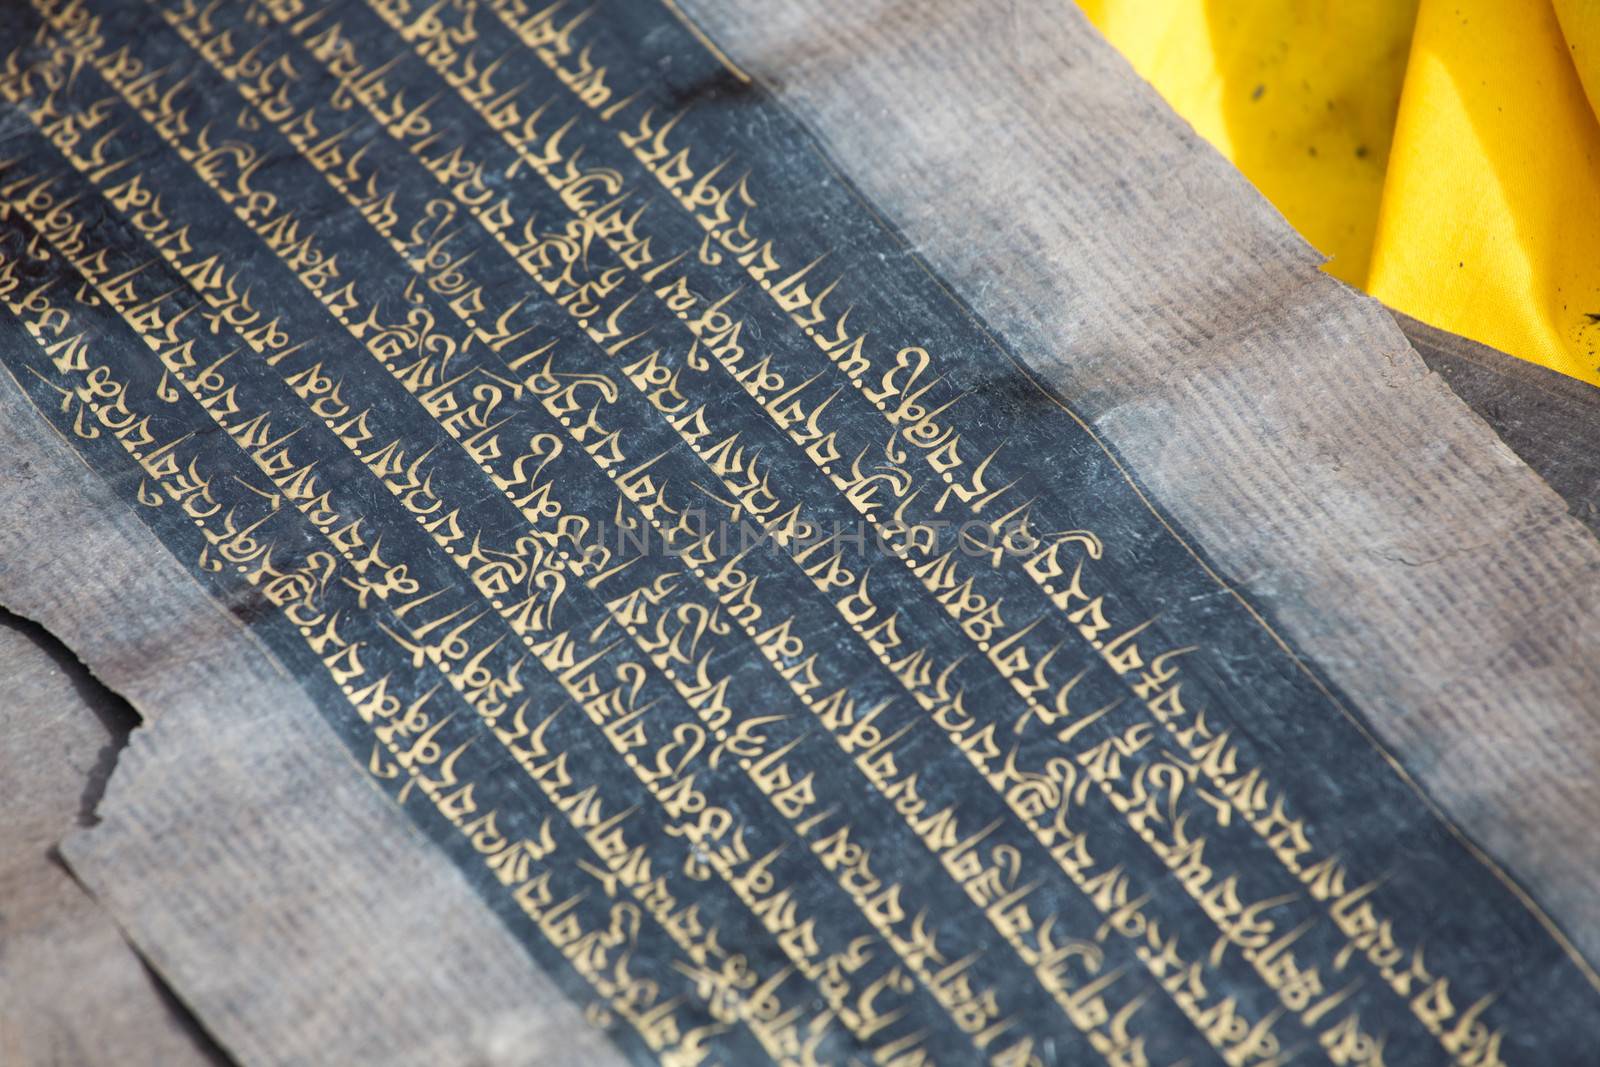 Close up of an old Tibetan manuscript. The kings’ minister Thonmi Sambhota developed the Tibetan script to accommodate the influx of the Buddha’s teachings, Sutra and Tantra manuscripts from India.